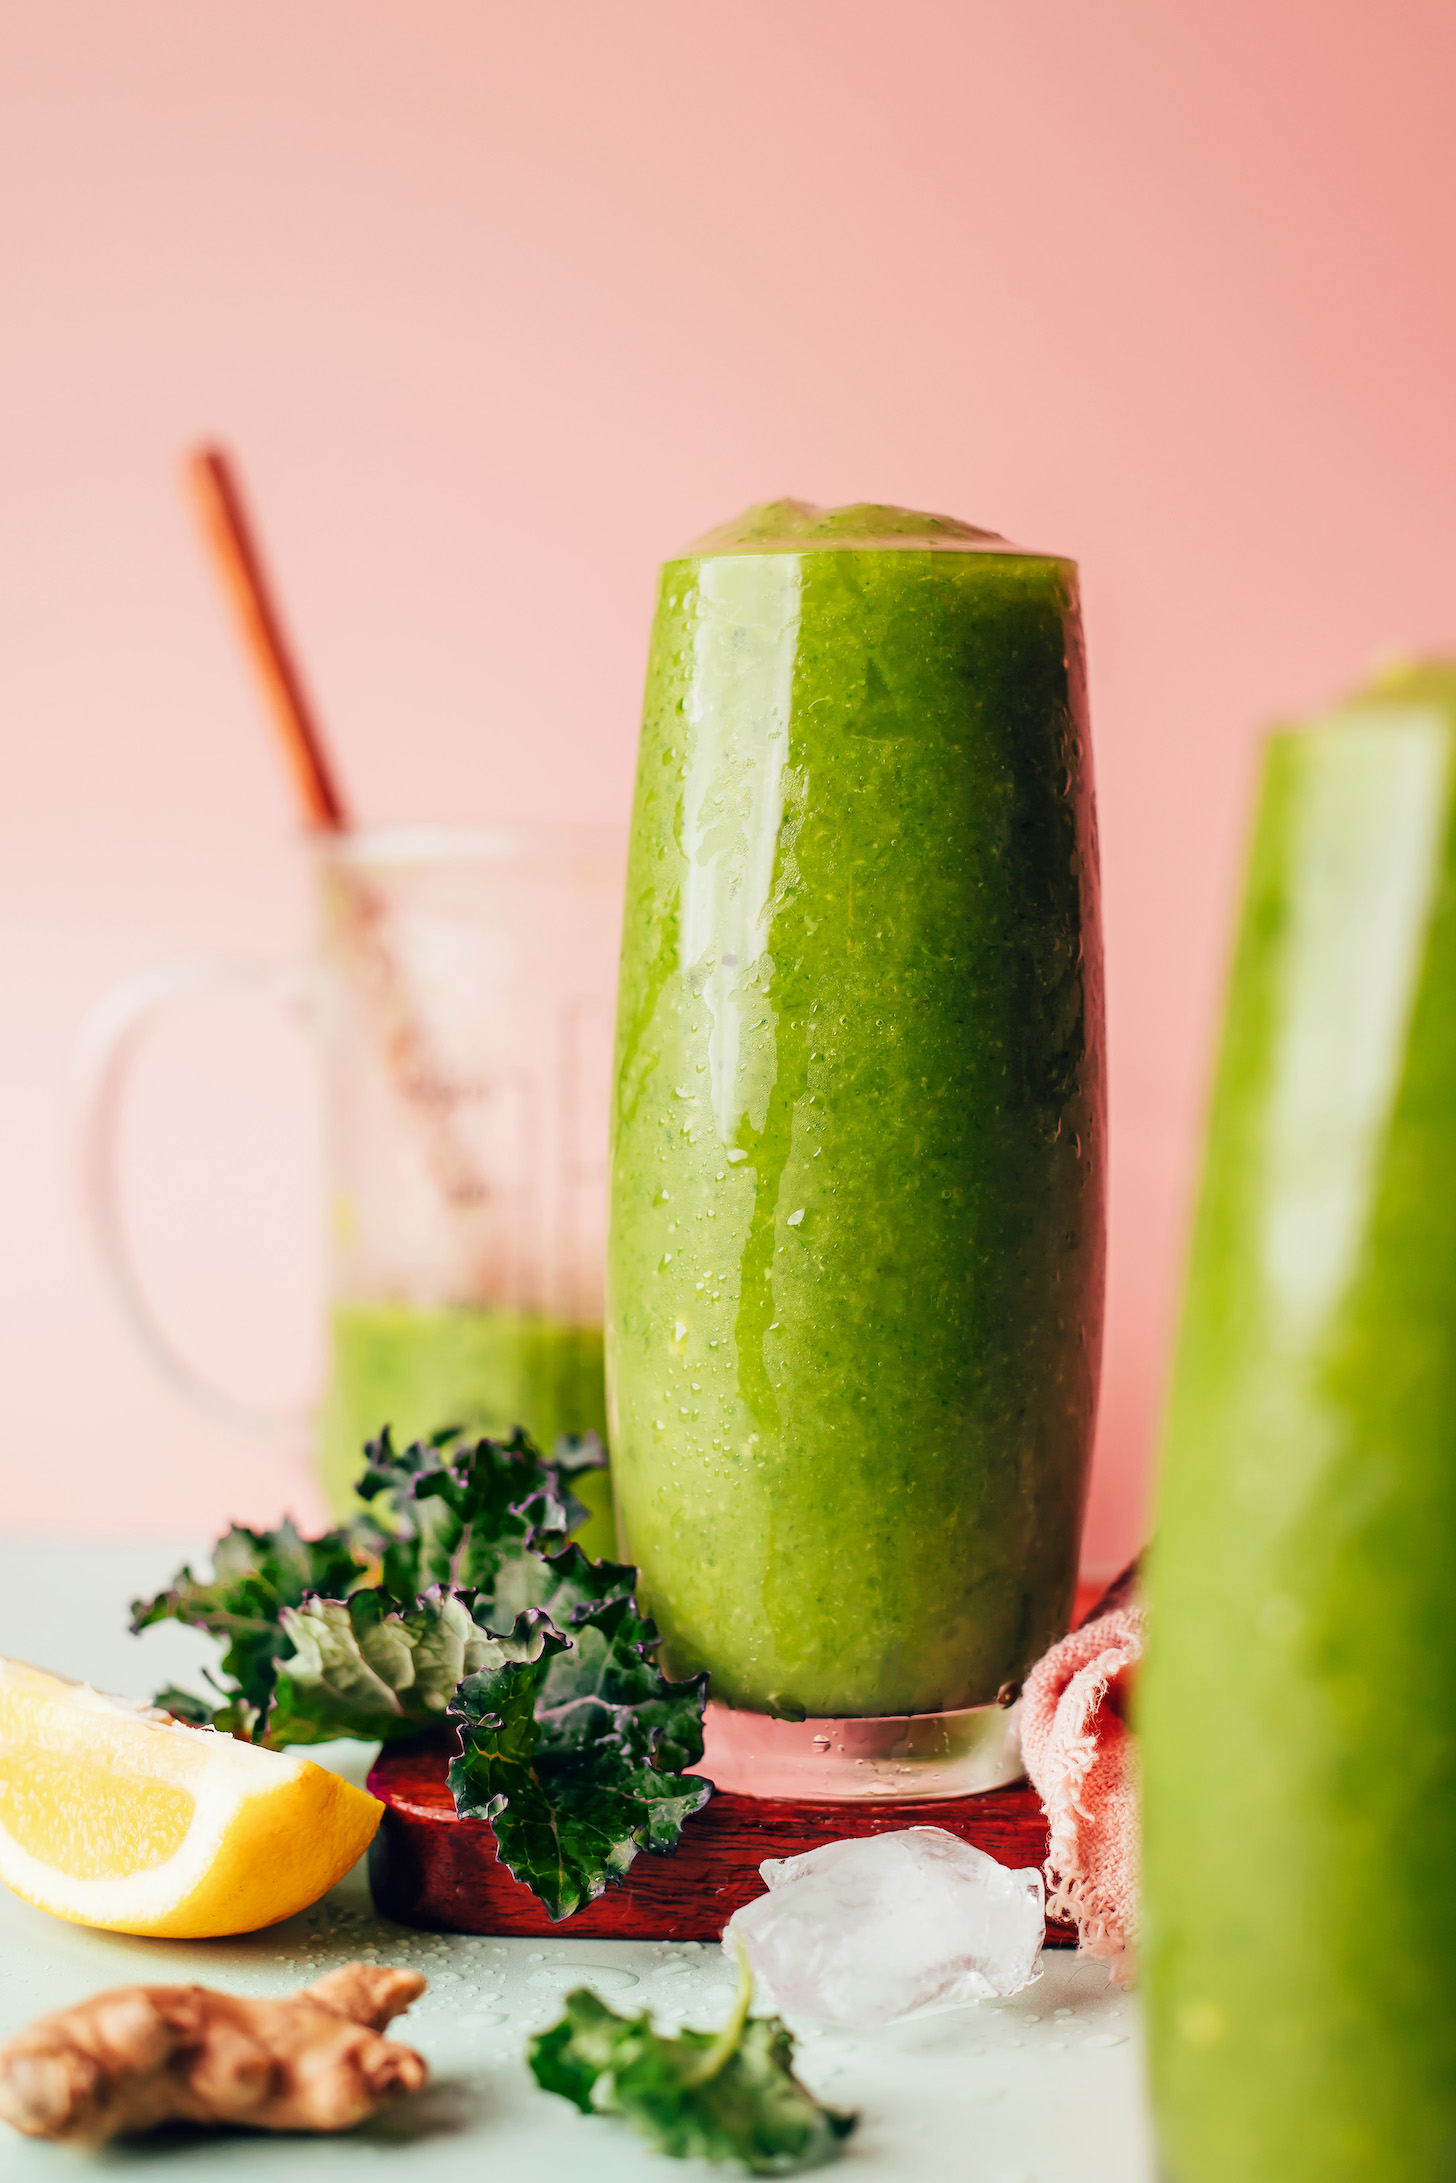 Tall drinking glasses filled with our Mango Ginger Kale Green Smoothie recipe